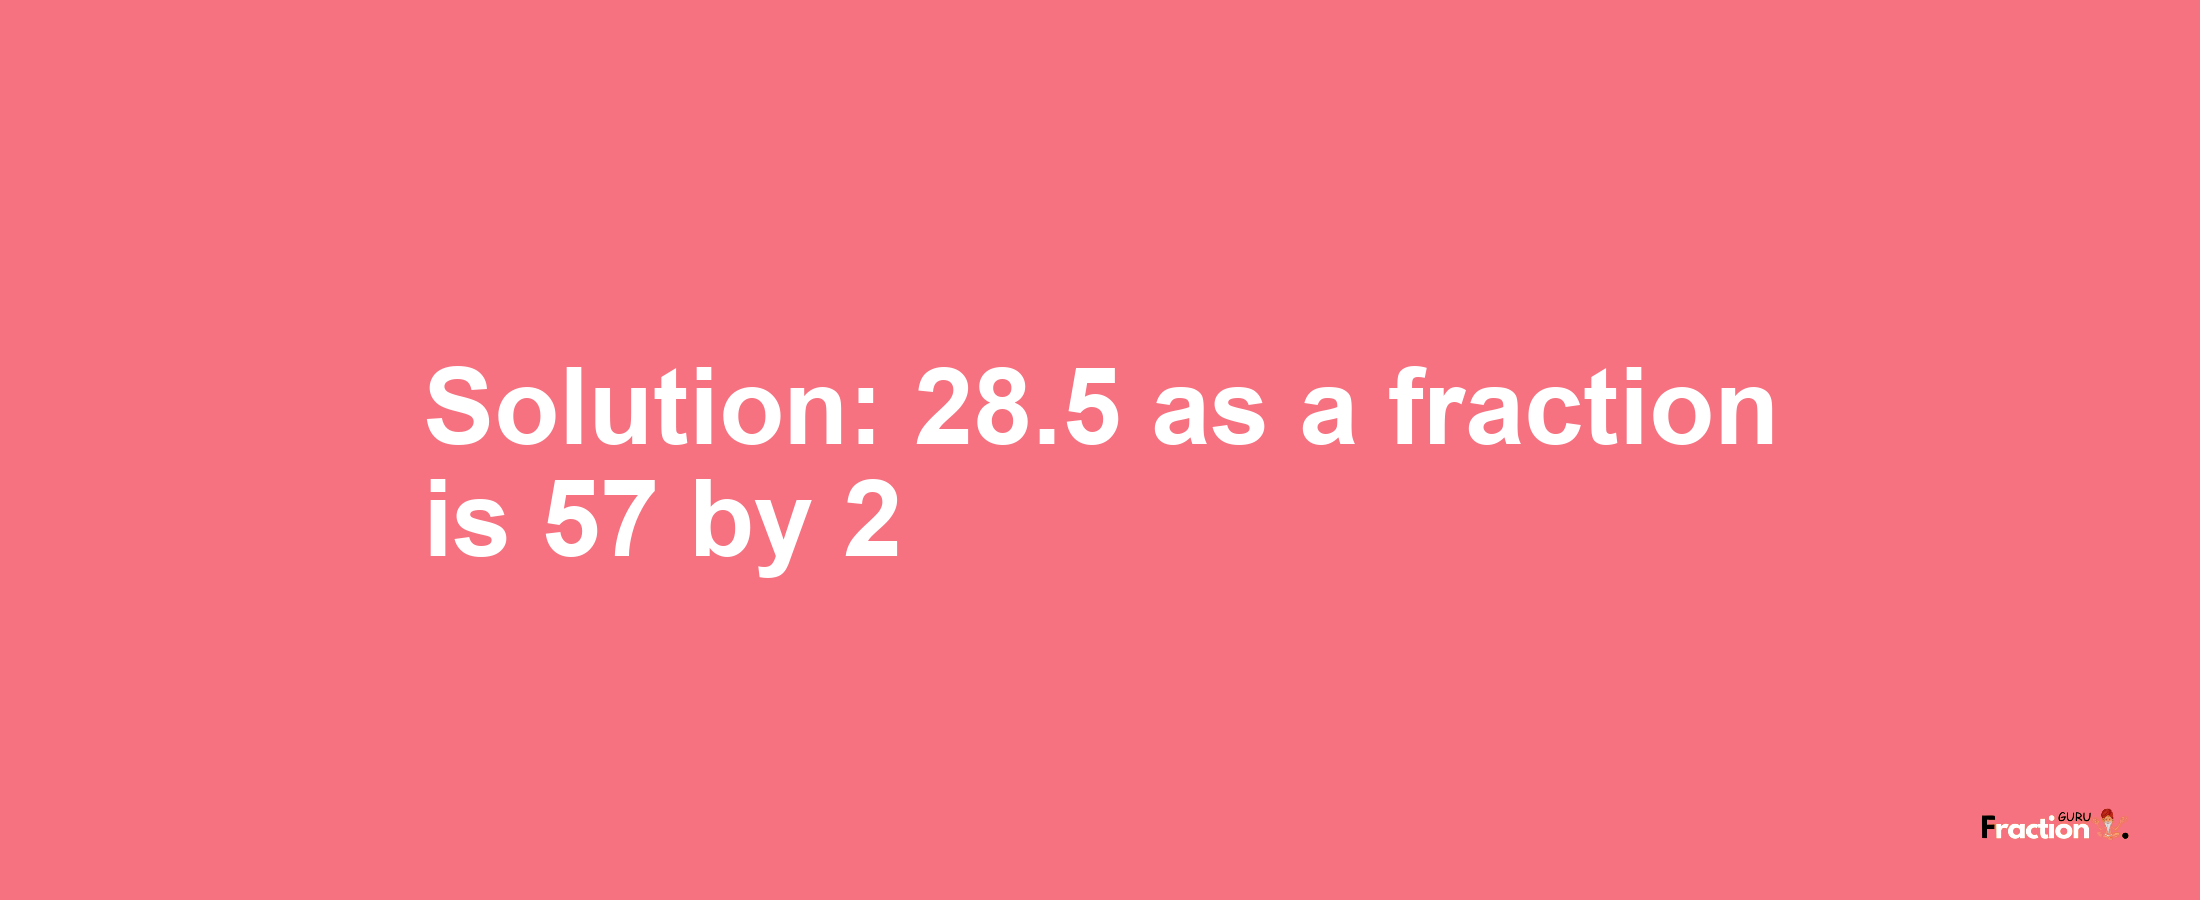 Solution:28.5 as a fraction is 57/2